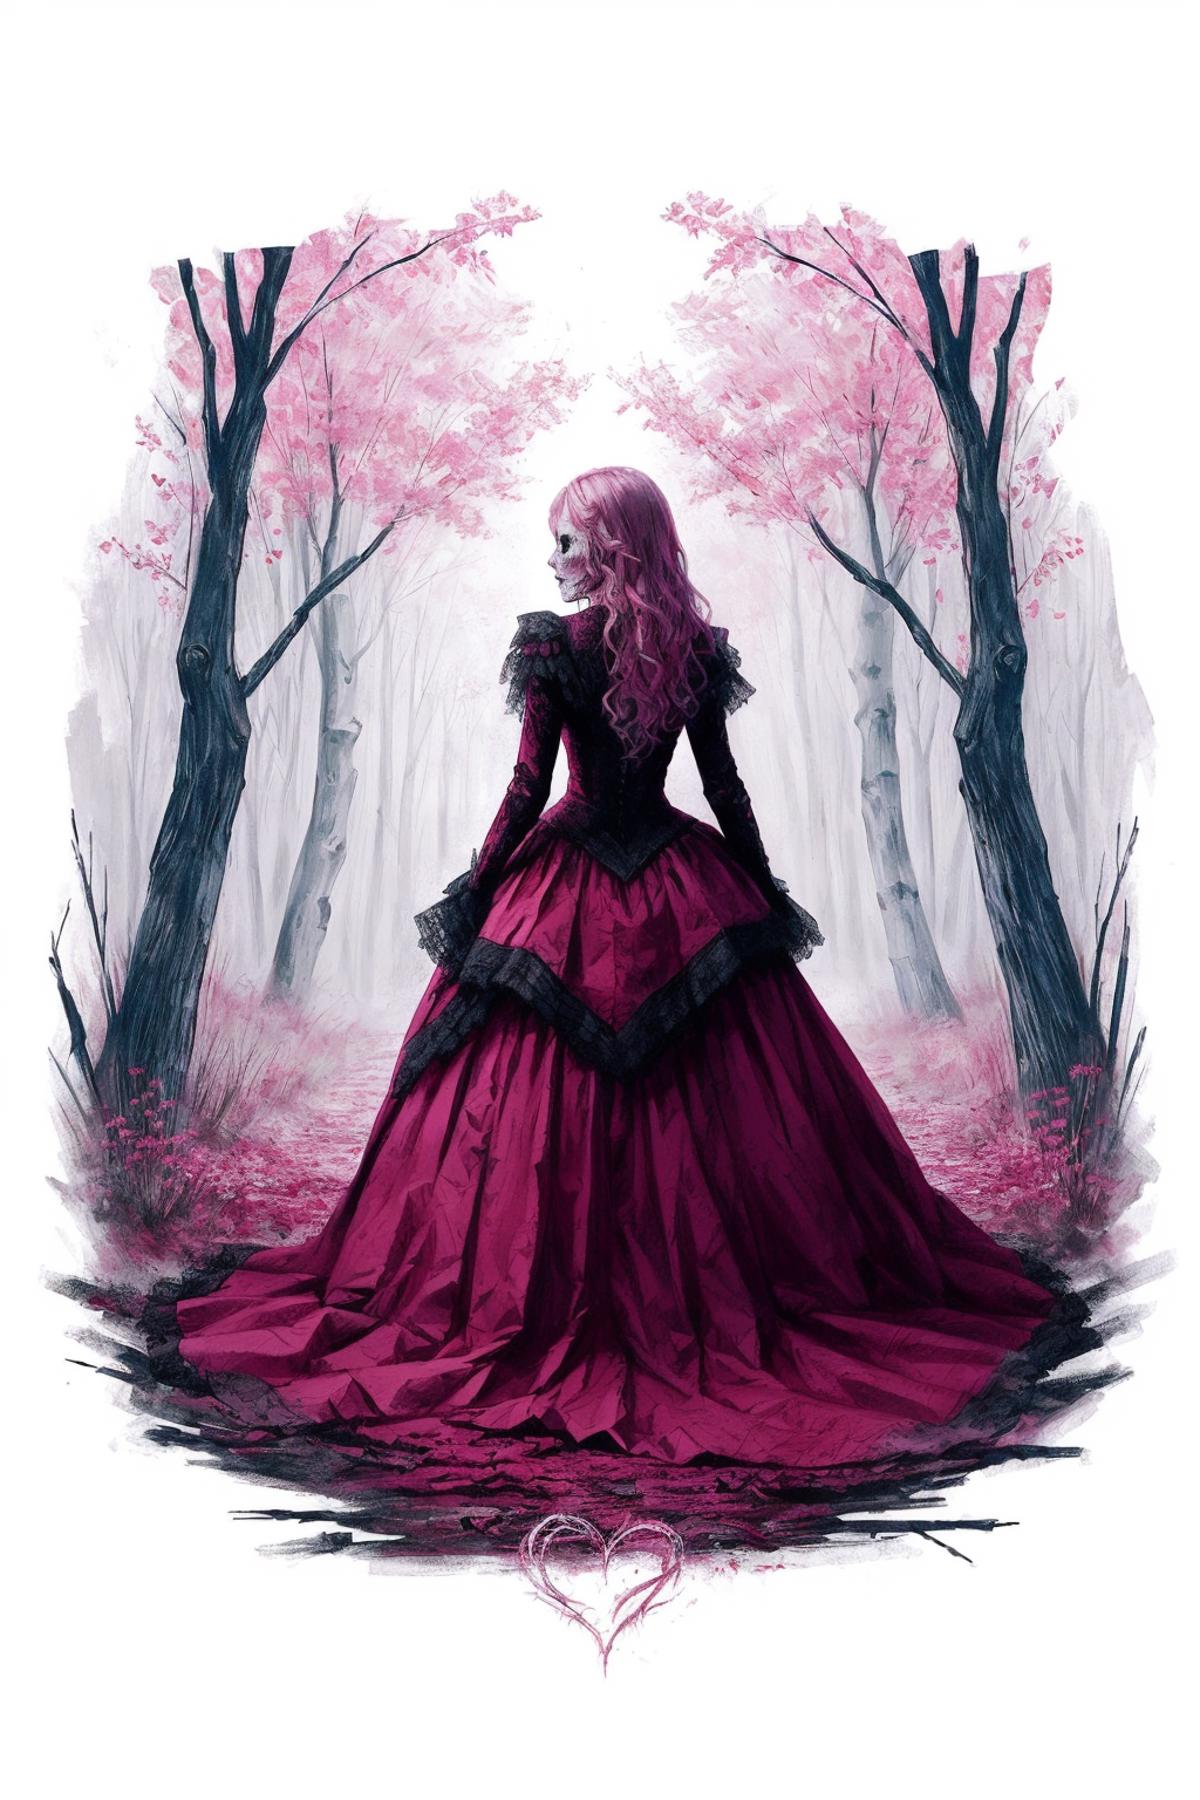 A woman in a purple dress standing in a forest.